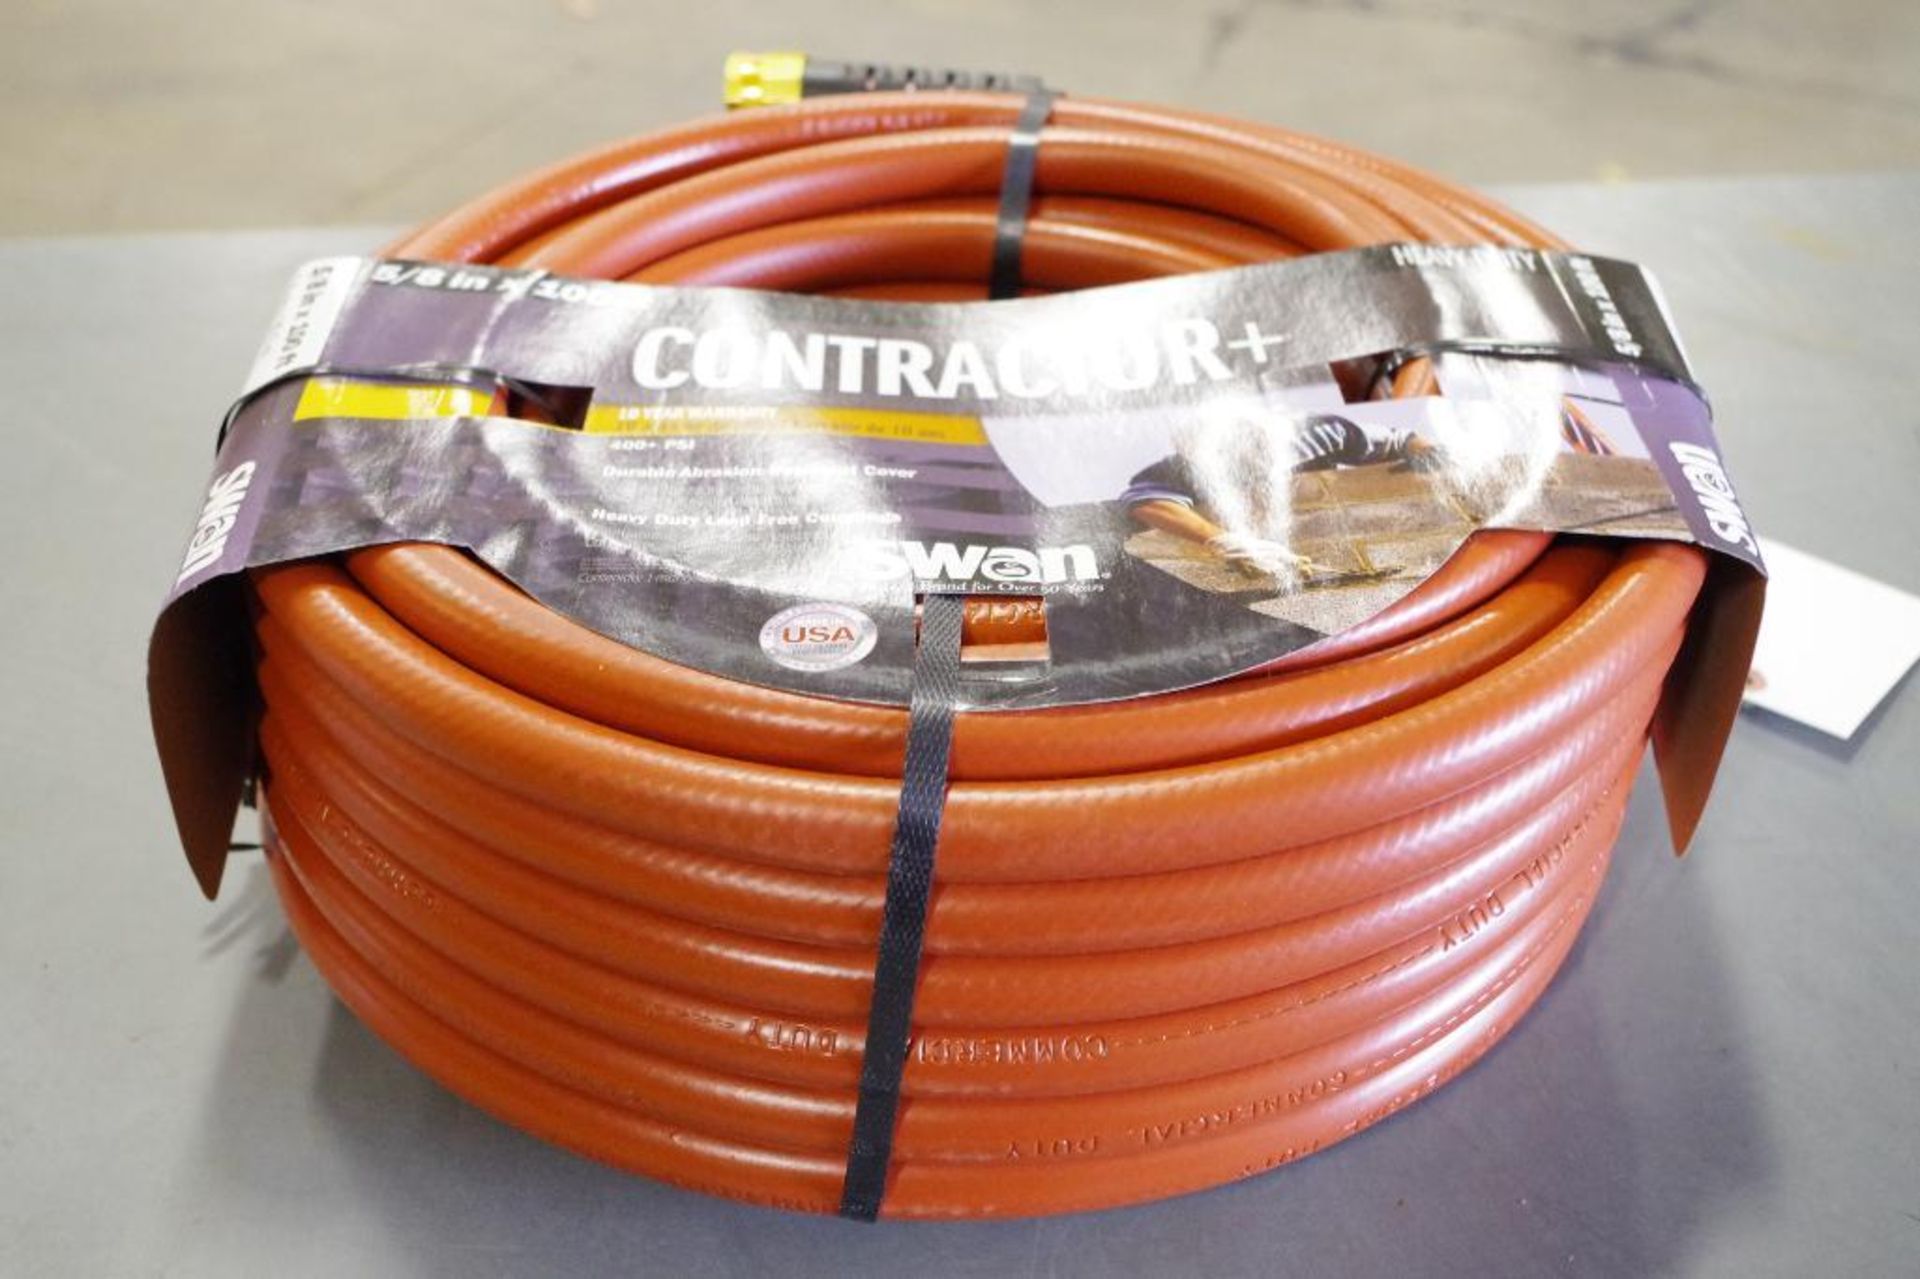 NEW SWAN CONTRACTOR+ 5/8" x 100' Heavy Duty 400 PSI Water Hose - Image 3 of 3